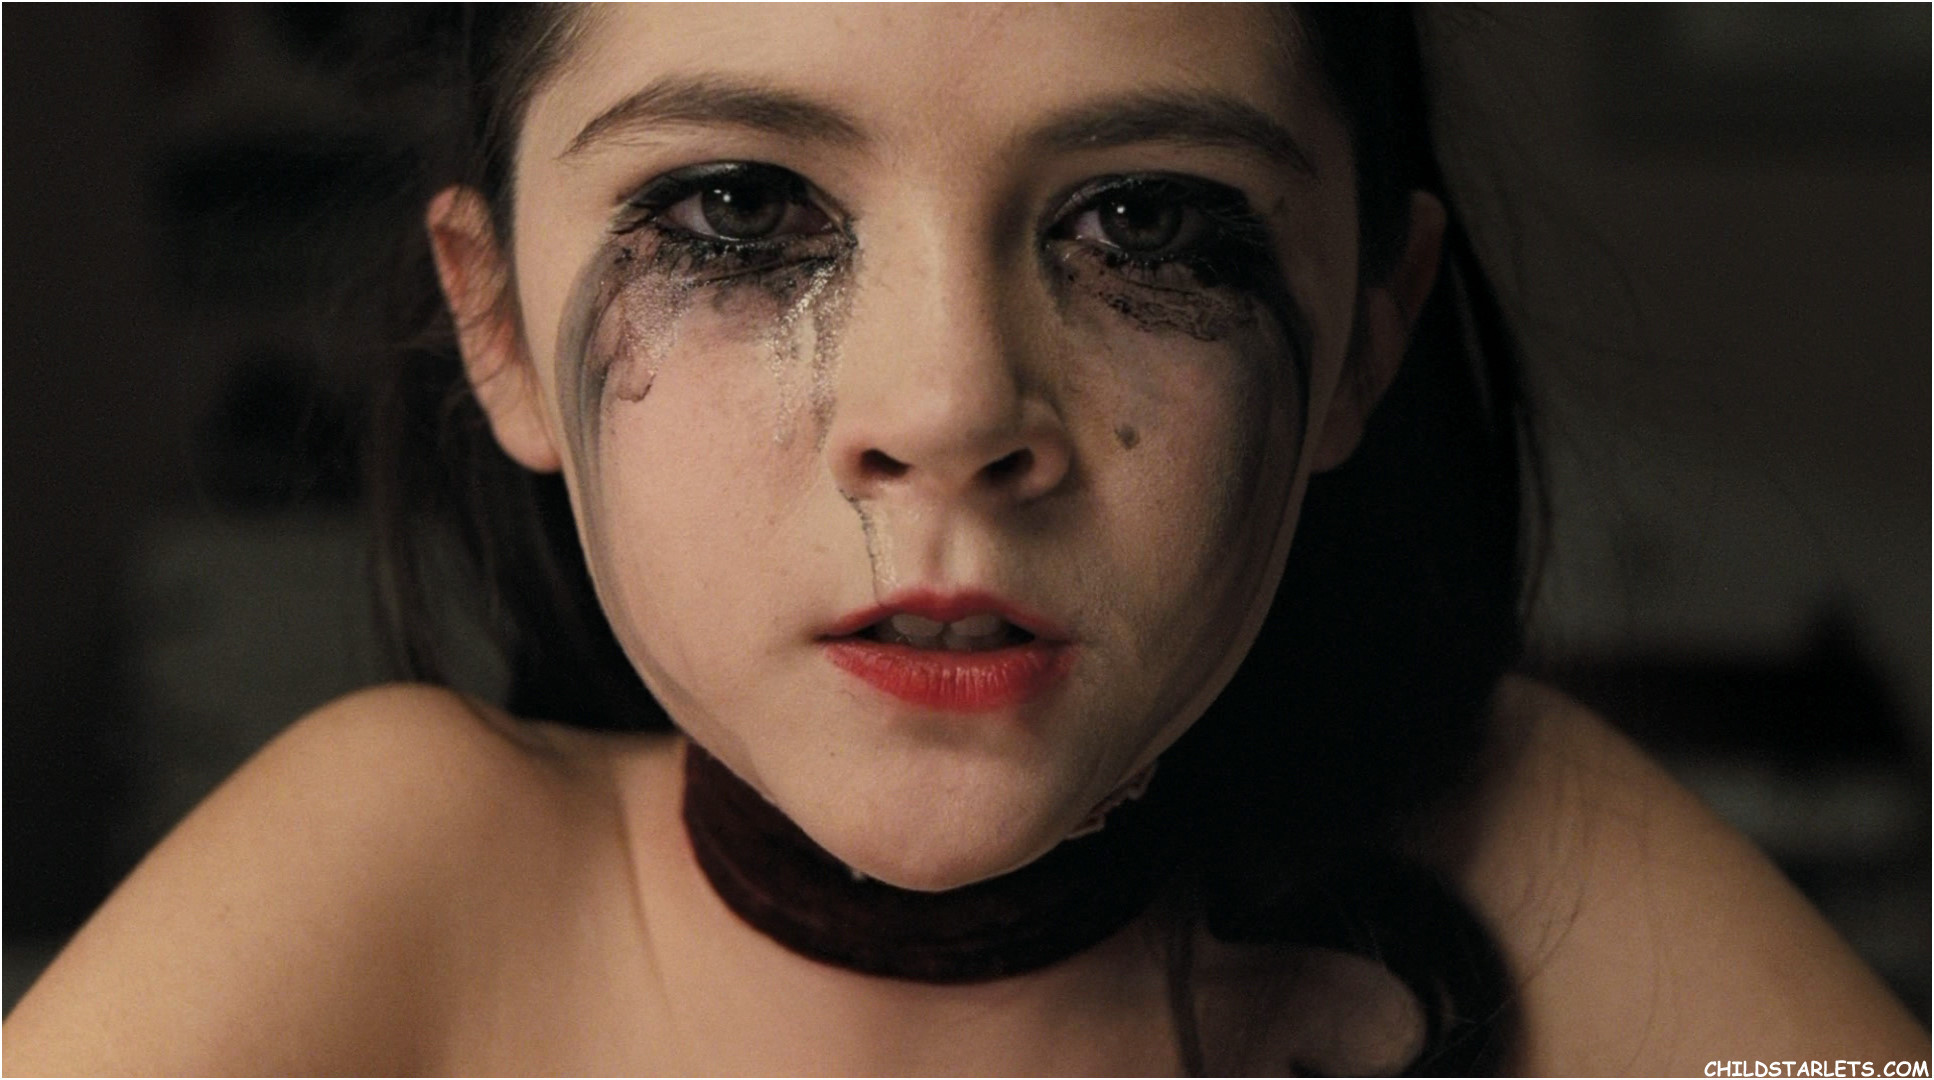 2. Esther in Orphan (2009)